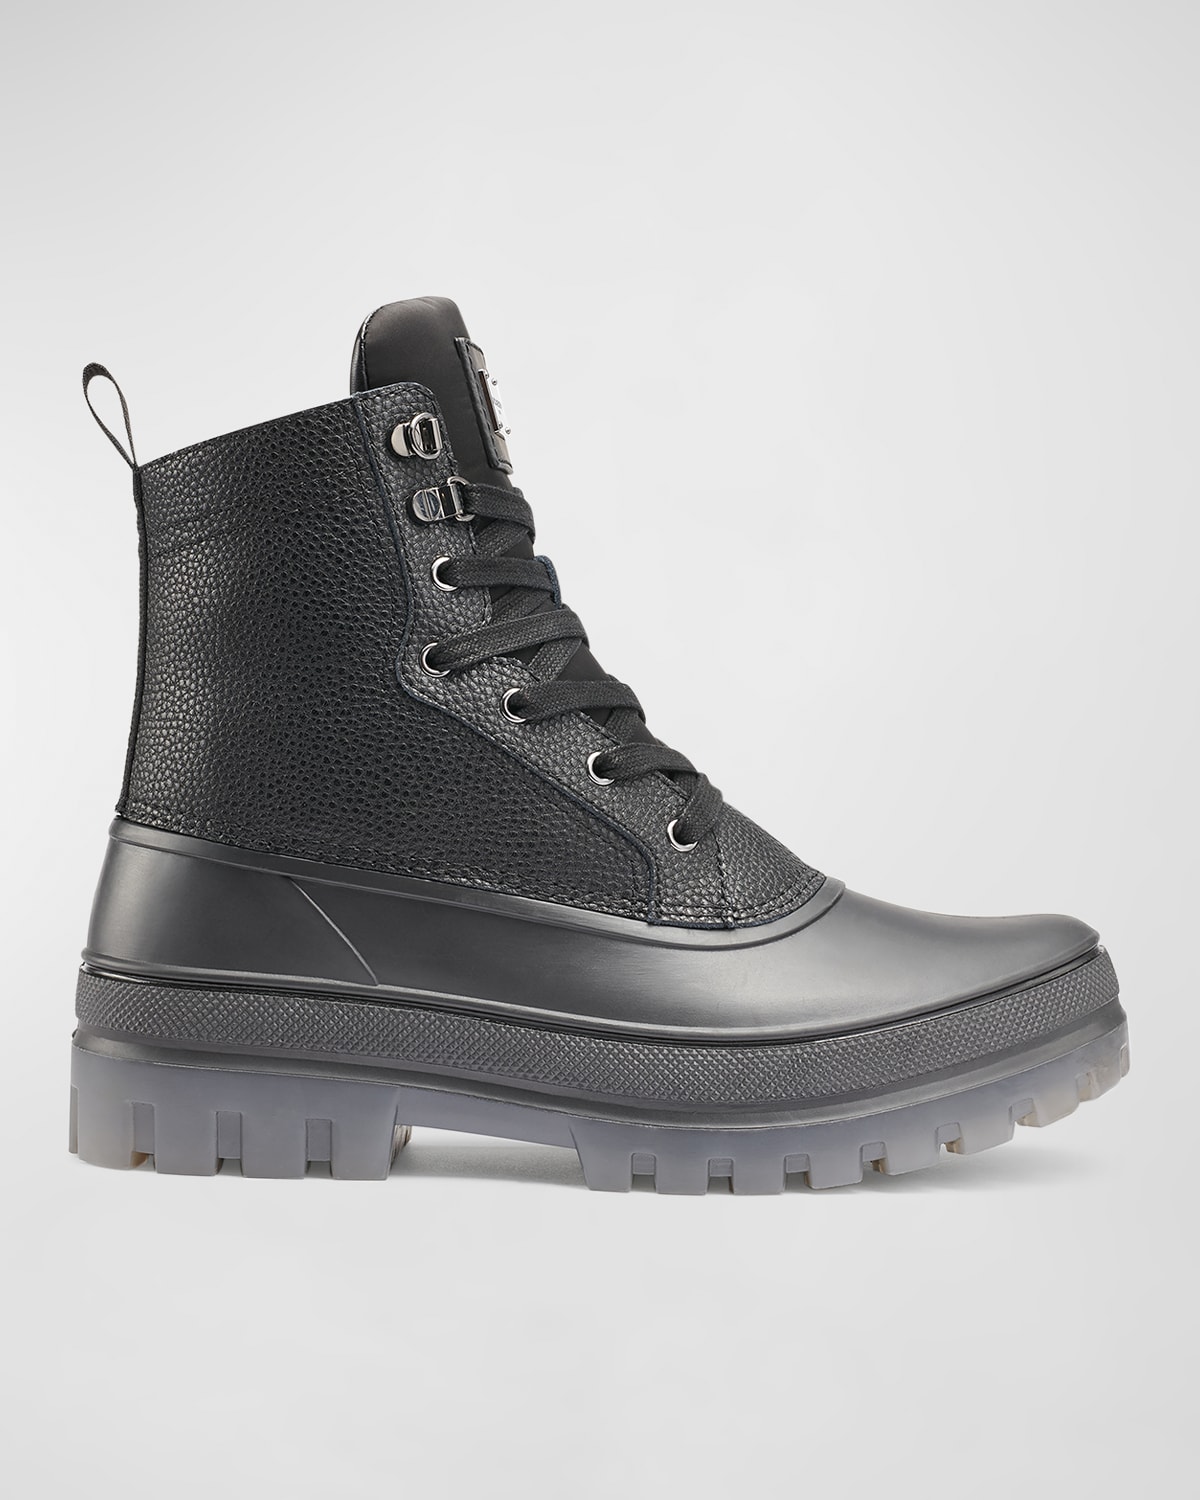 Men's Fleece-Lined Leather Lace-Up Winter Boots